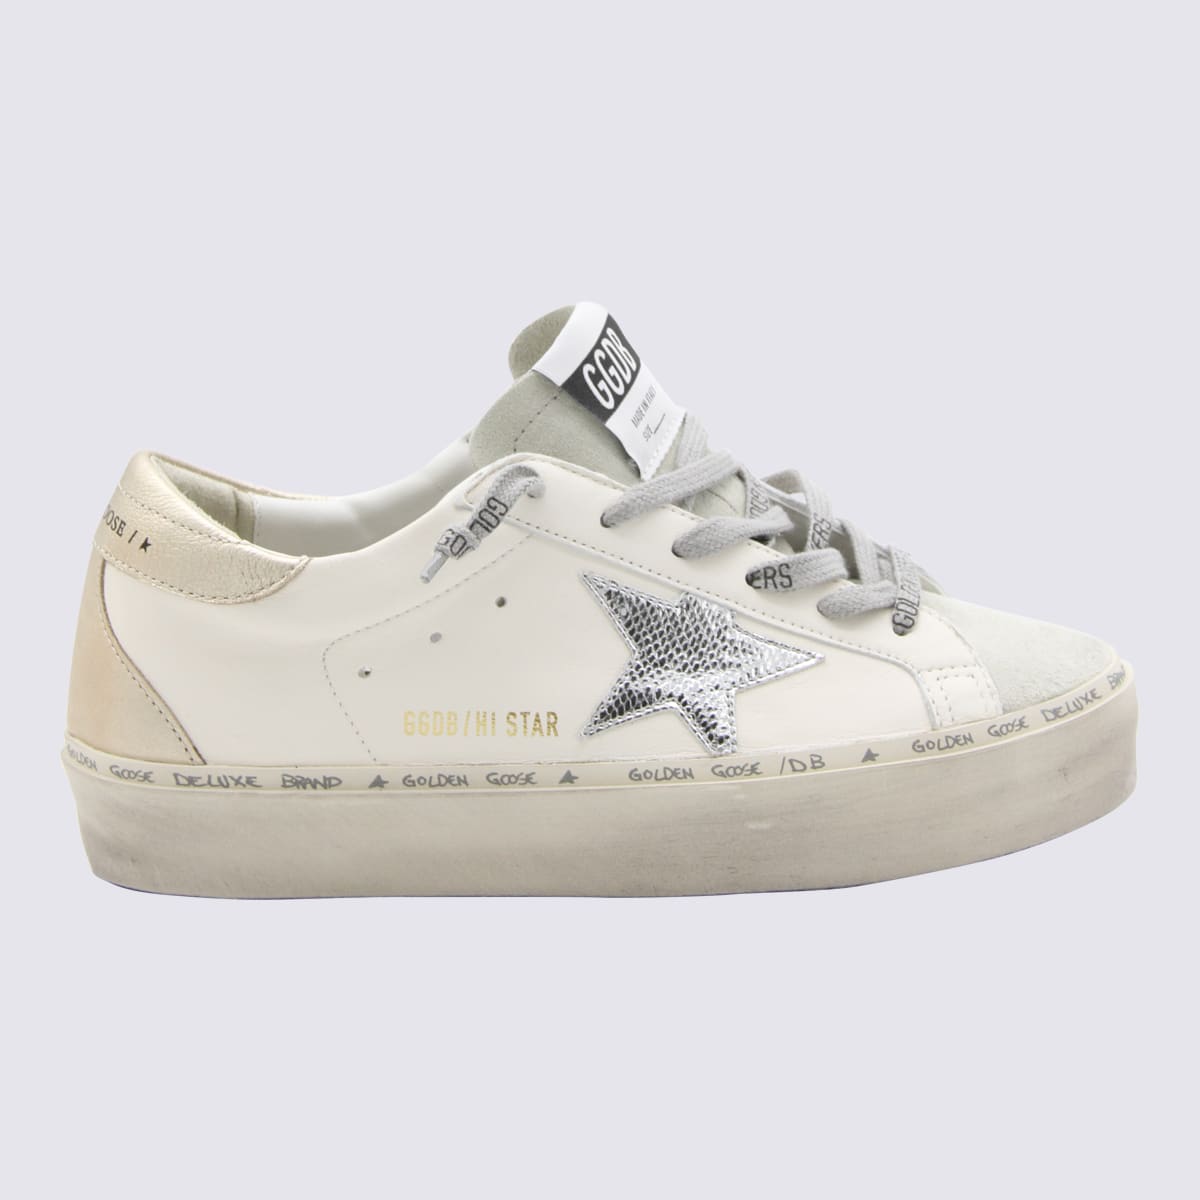 GOLDEN GOOSE WHITE AND SILVER LEATHER HI STAR GLITTER SNEAKERS